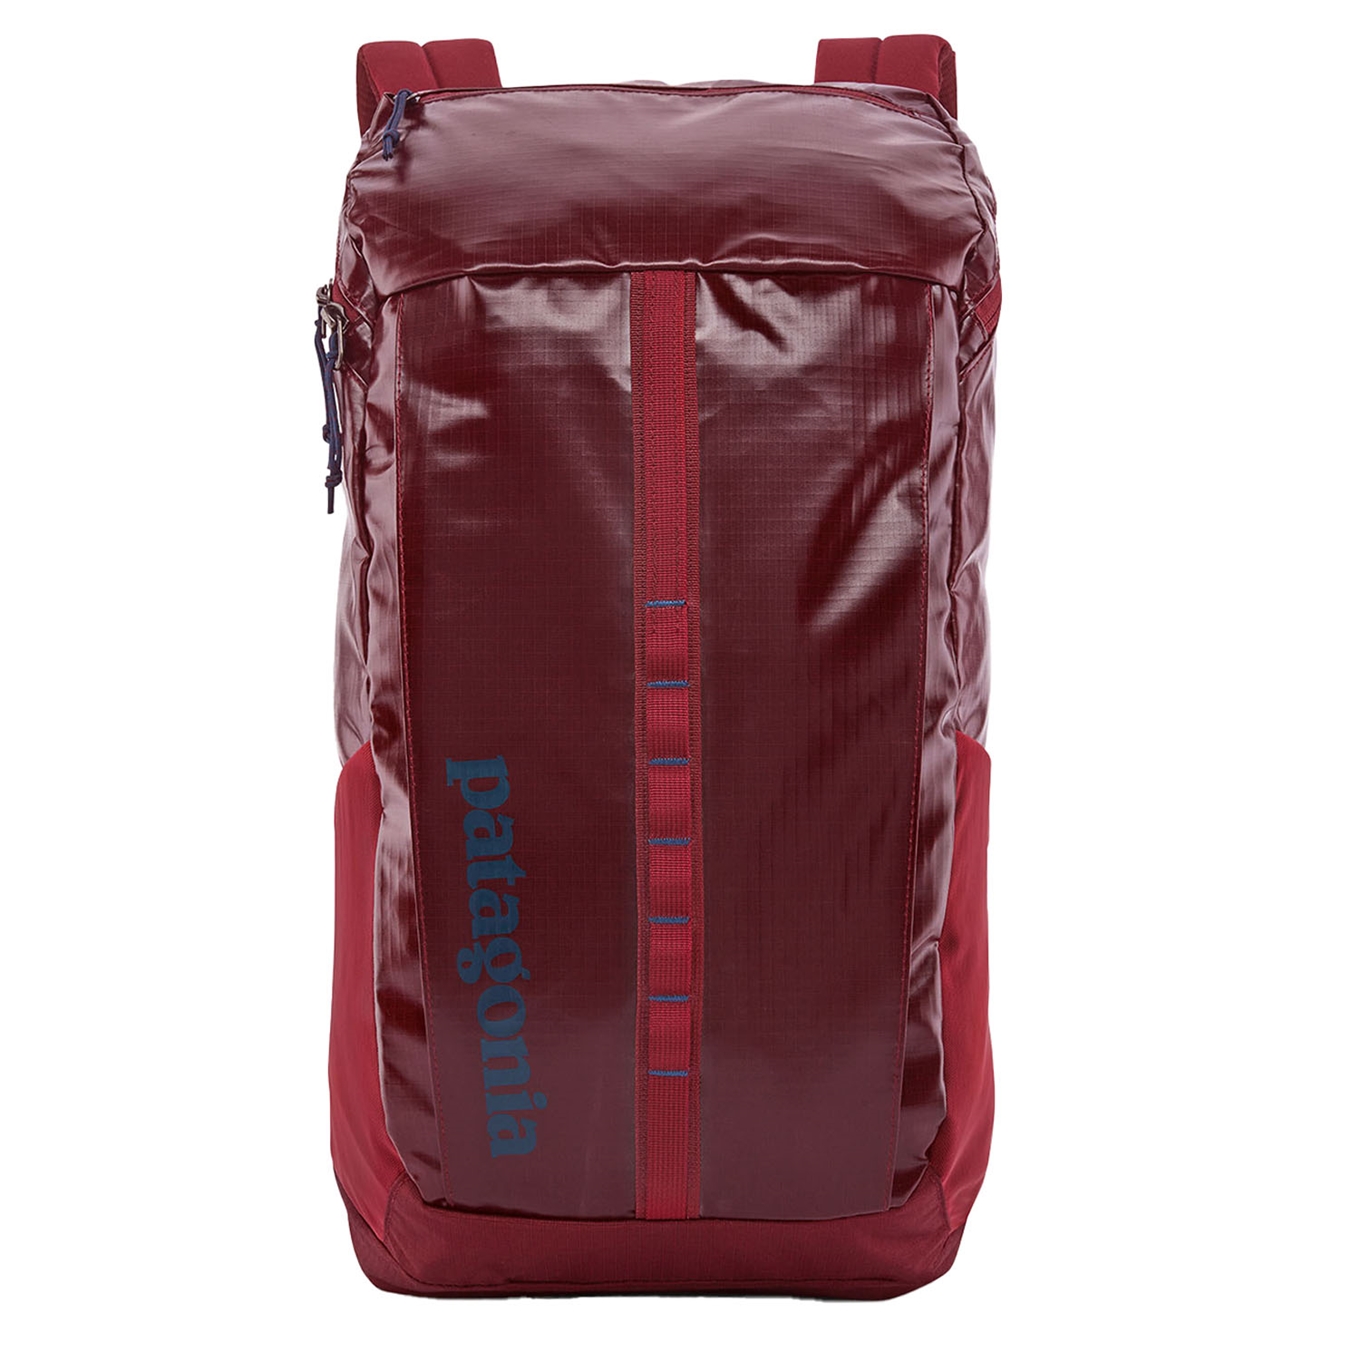 Patagonia Black Hole Pack 25L wax red backpack